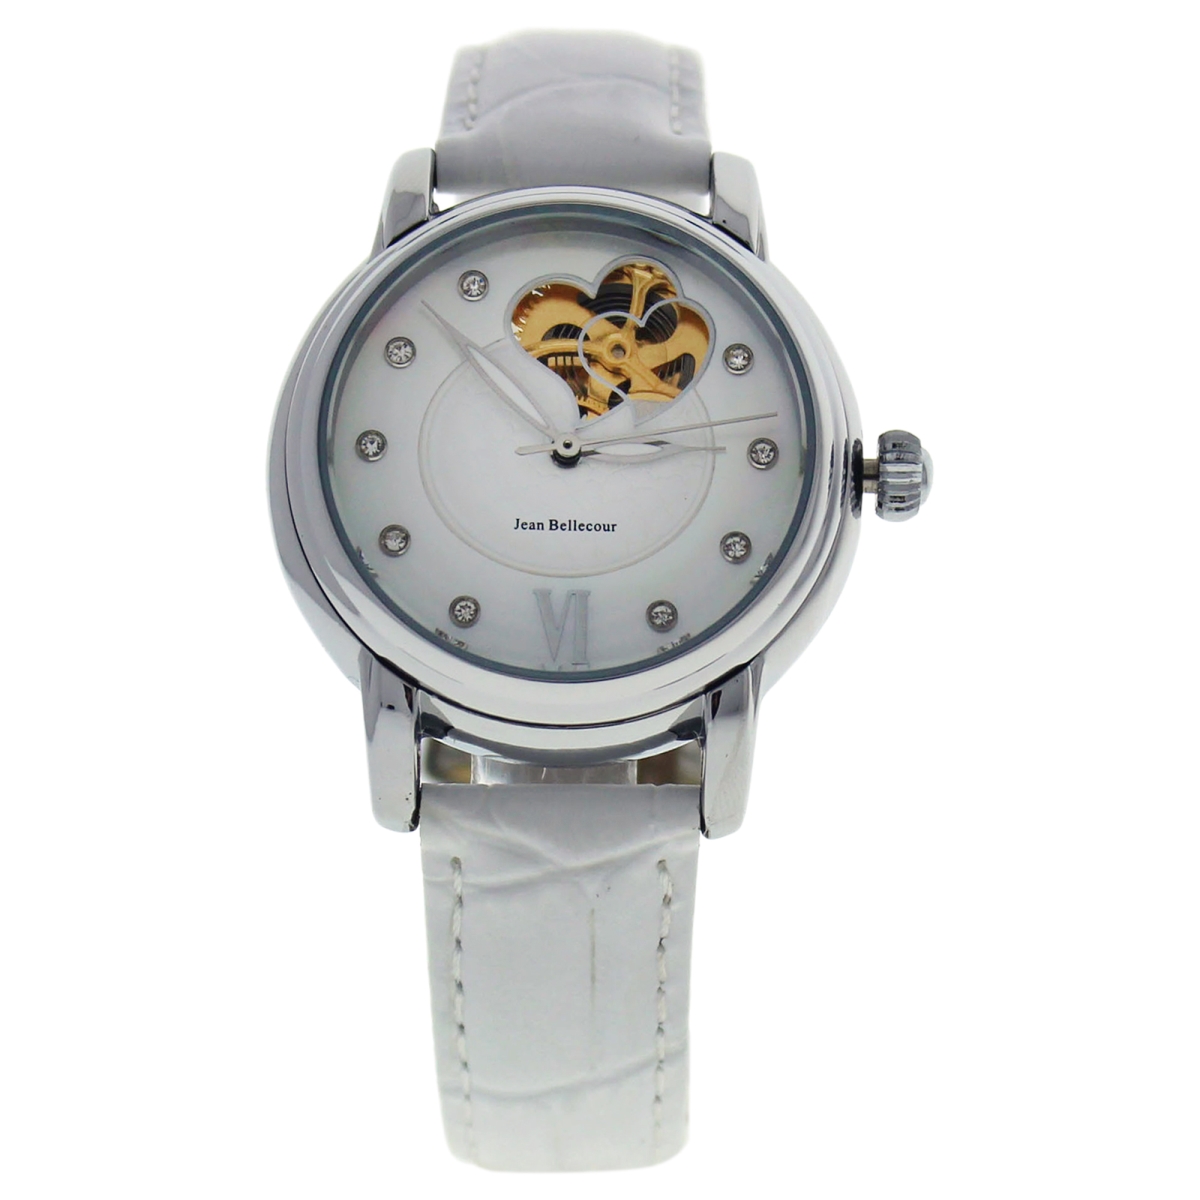 Picture of Jean Bellecour W-WAT-1456 Silver & White Leather Strap Watch for Women - REDM3